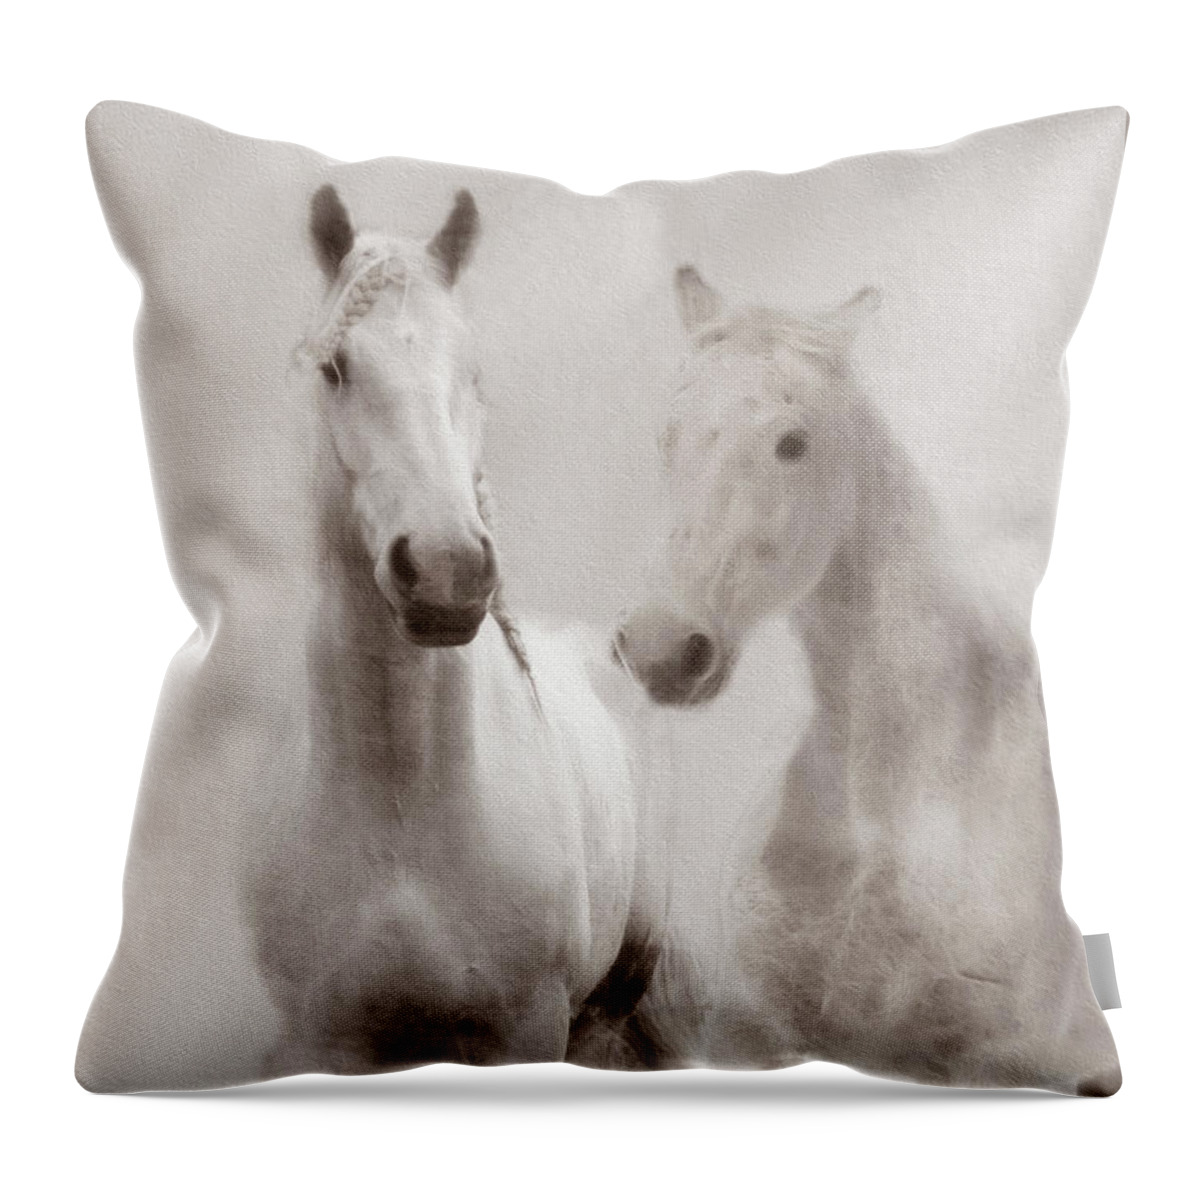 Horses Throw Pillow featuring the photograph Dreamy Horses by Michele A Loftus